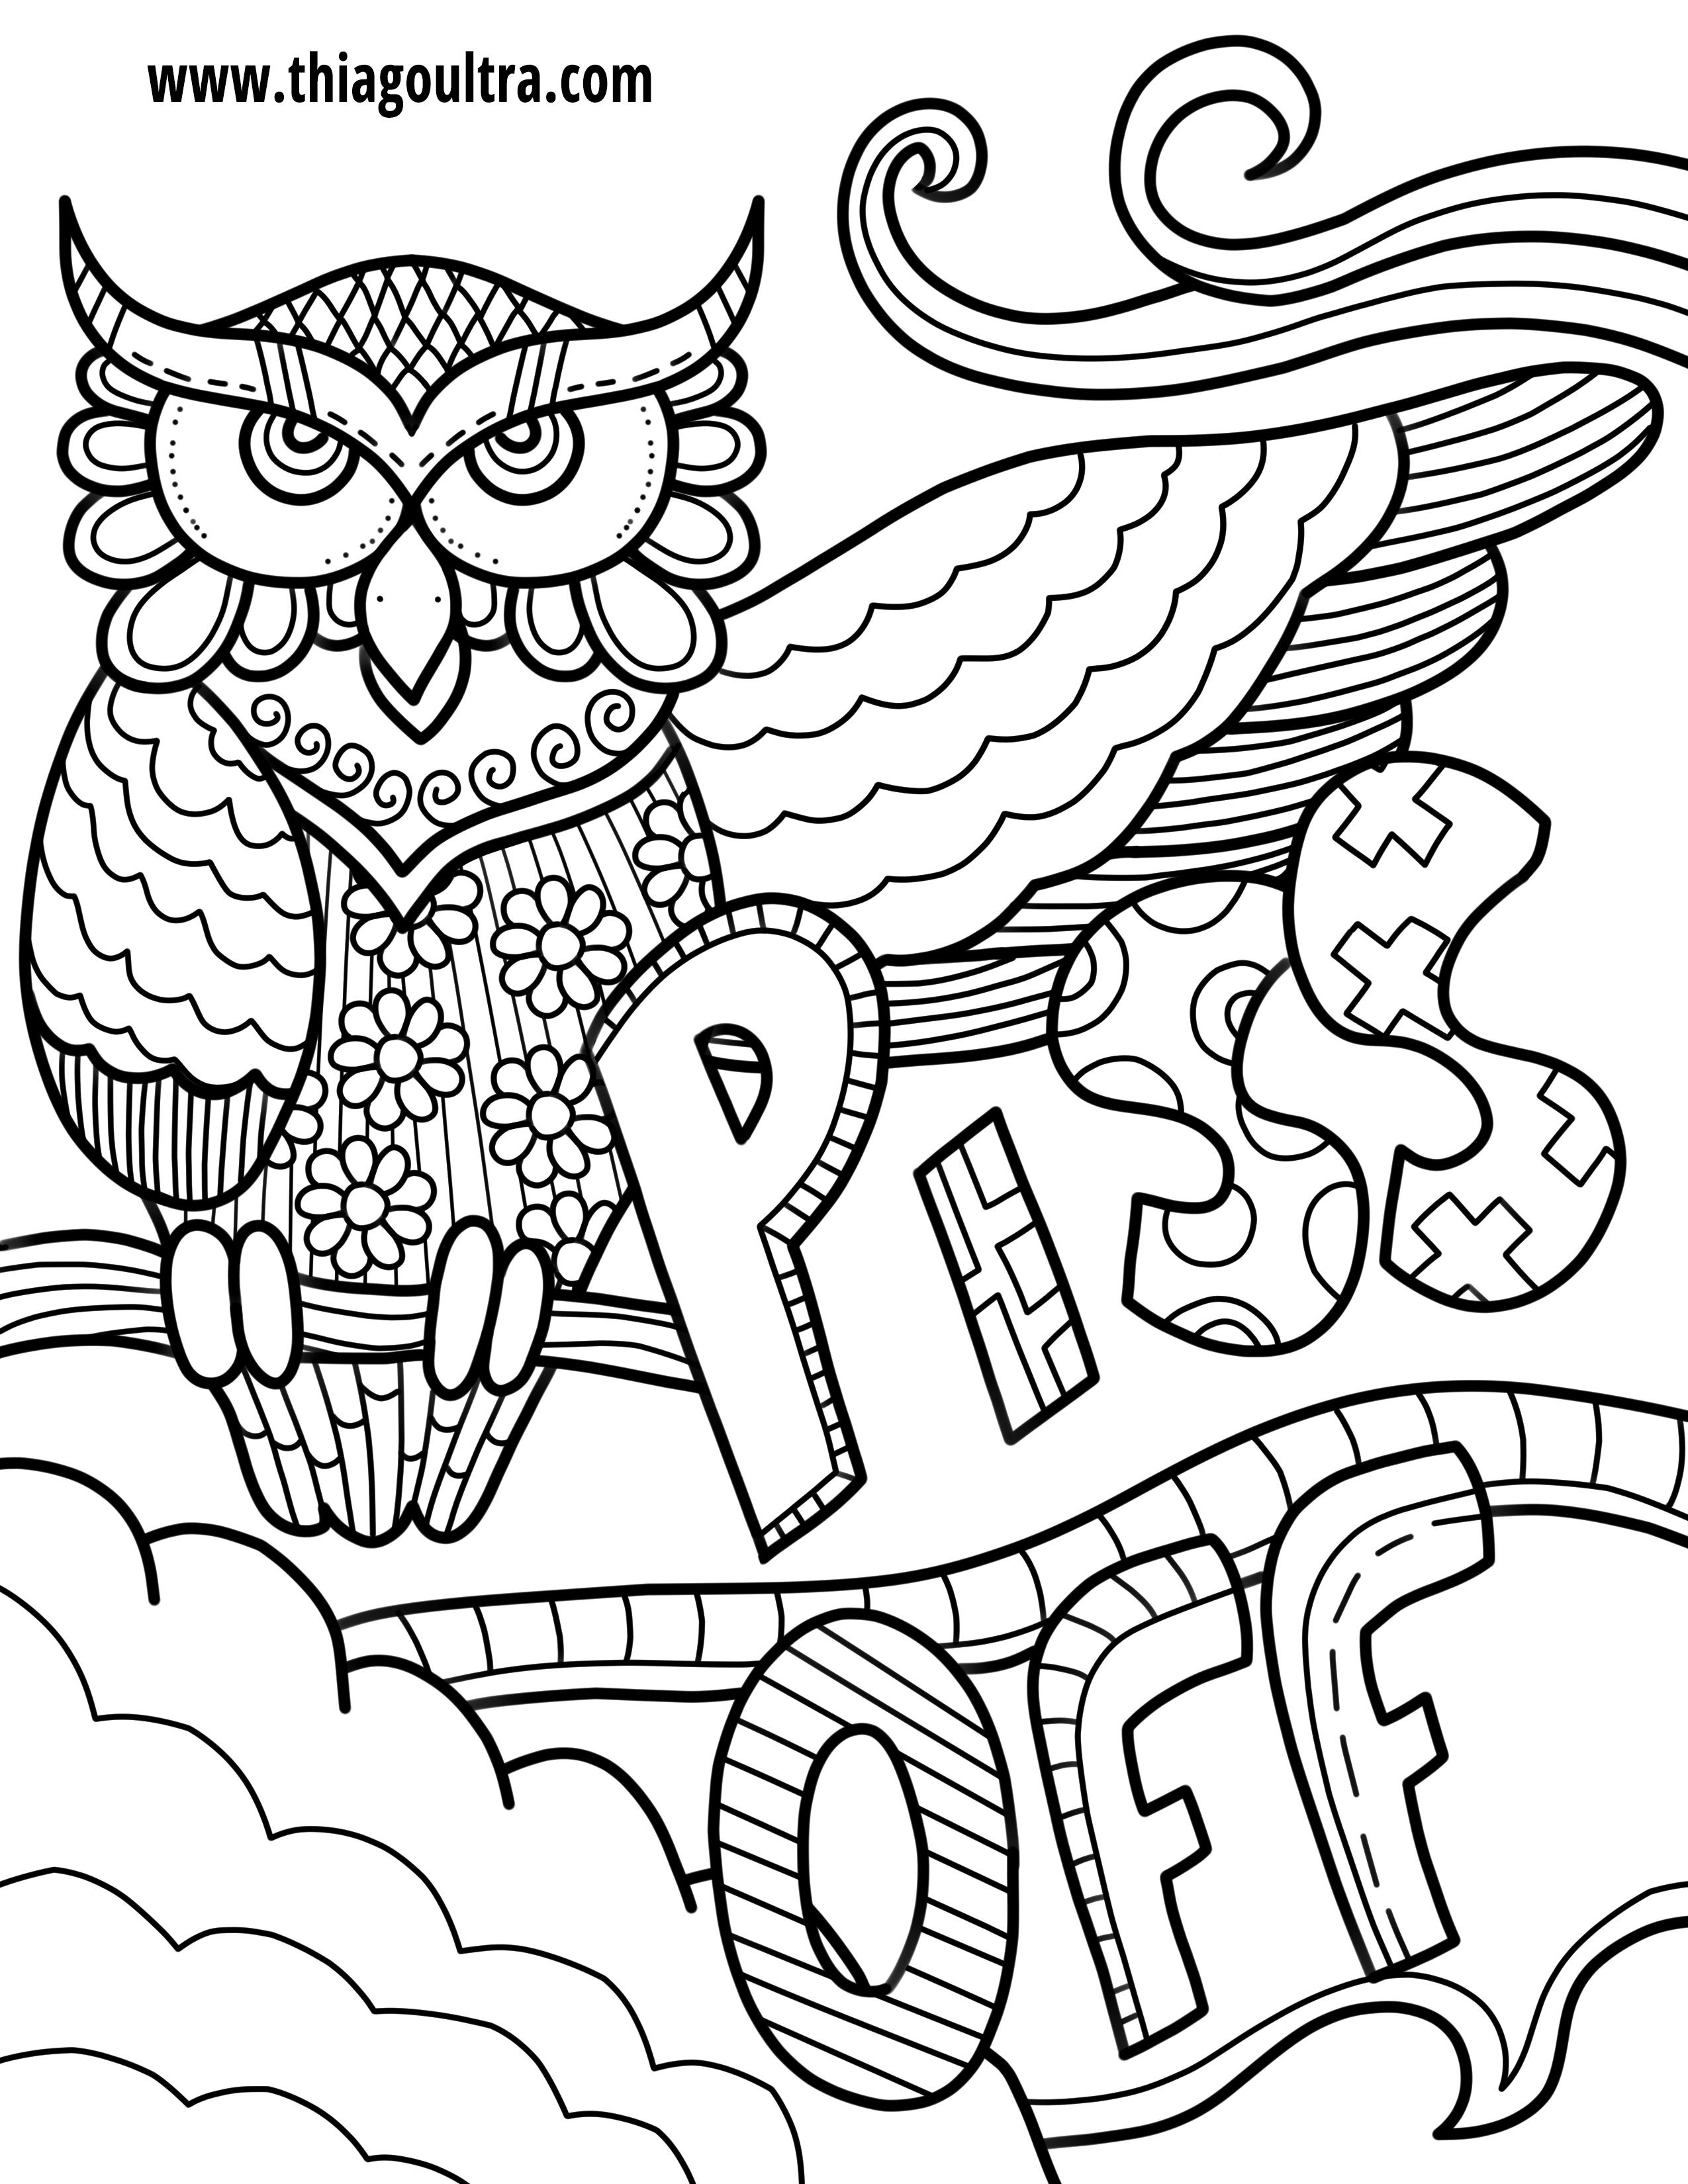 Unique Free Printable Coloring Pages For Adults Only Swear Words - Free Printable Coloring Pages For Adults Only Swear Words